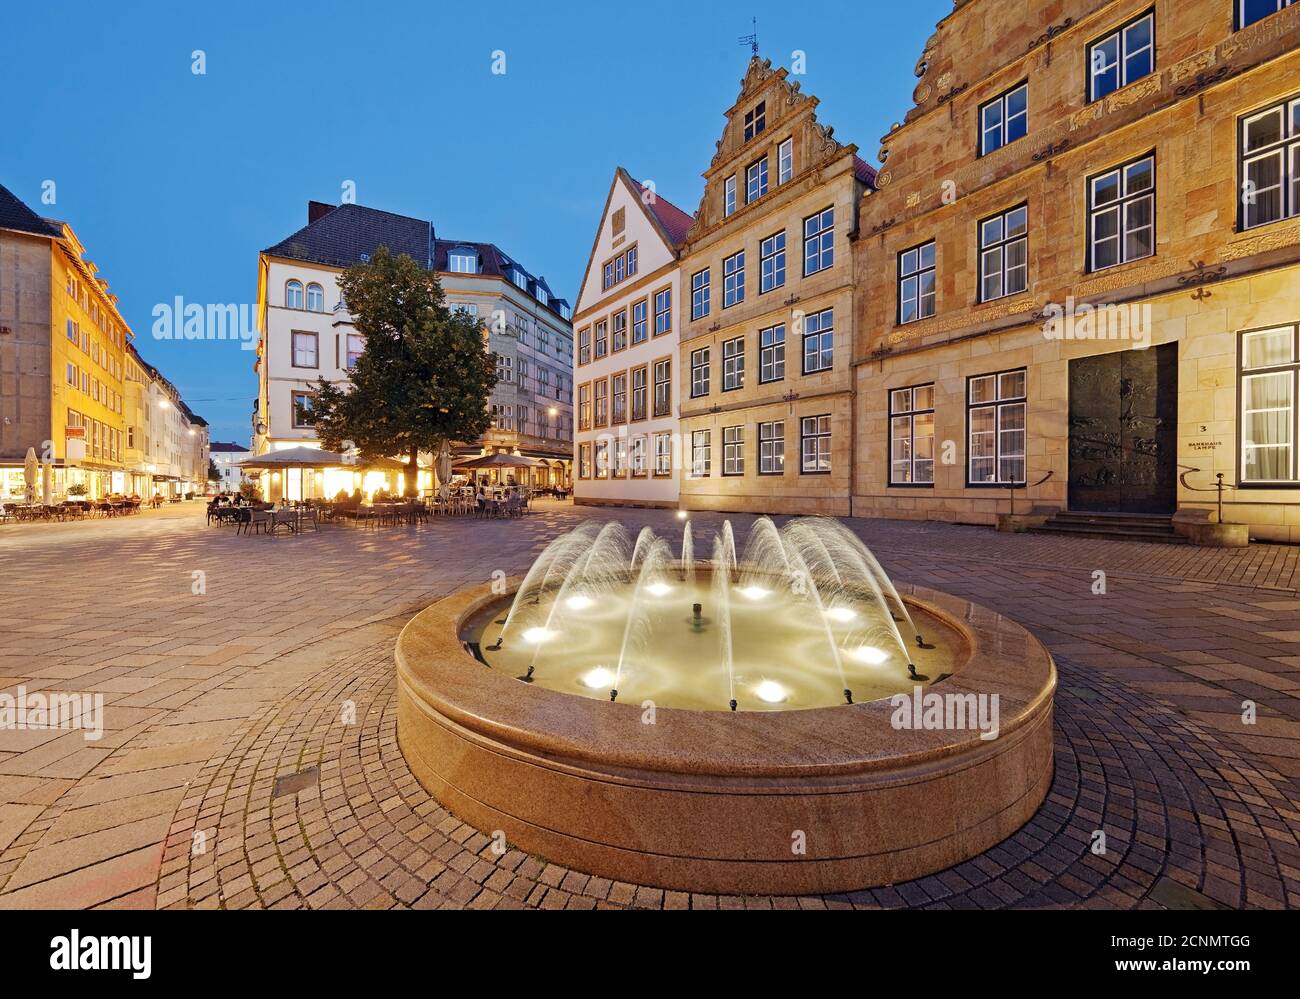 Old market with fountain and buerger houses in the evening, Bielefeld, Germany, Europe Stock Photo